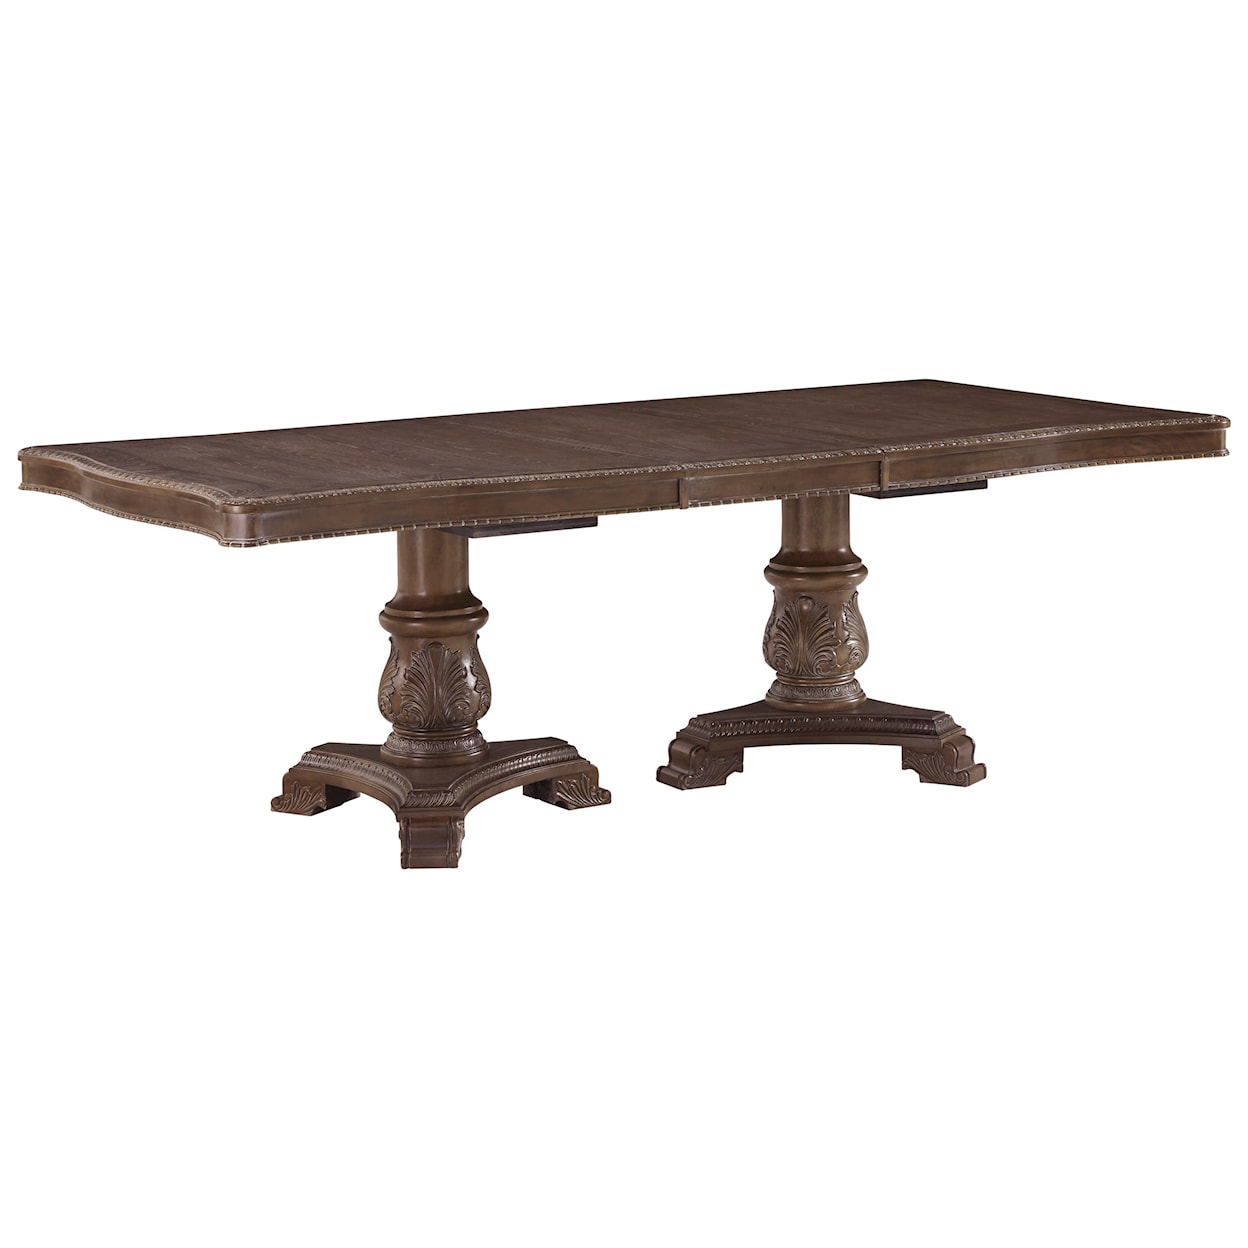 Signature Design by Ashley Charmond 9pc Dining Room Group